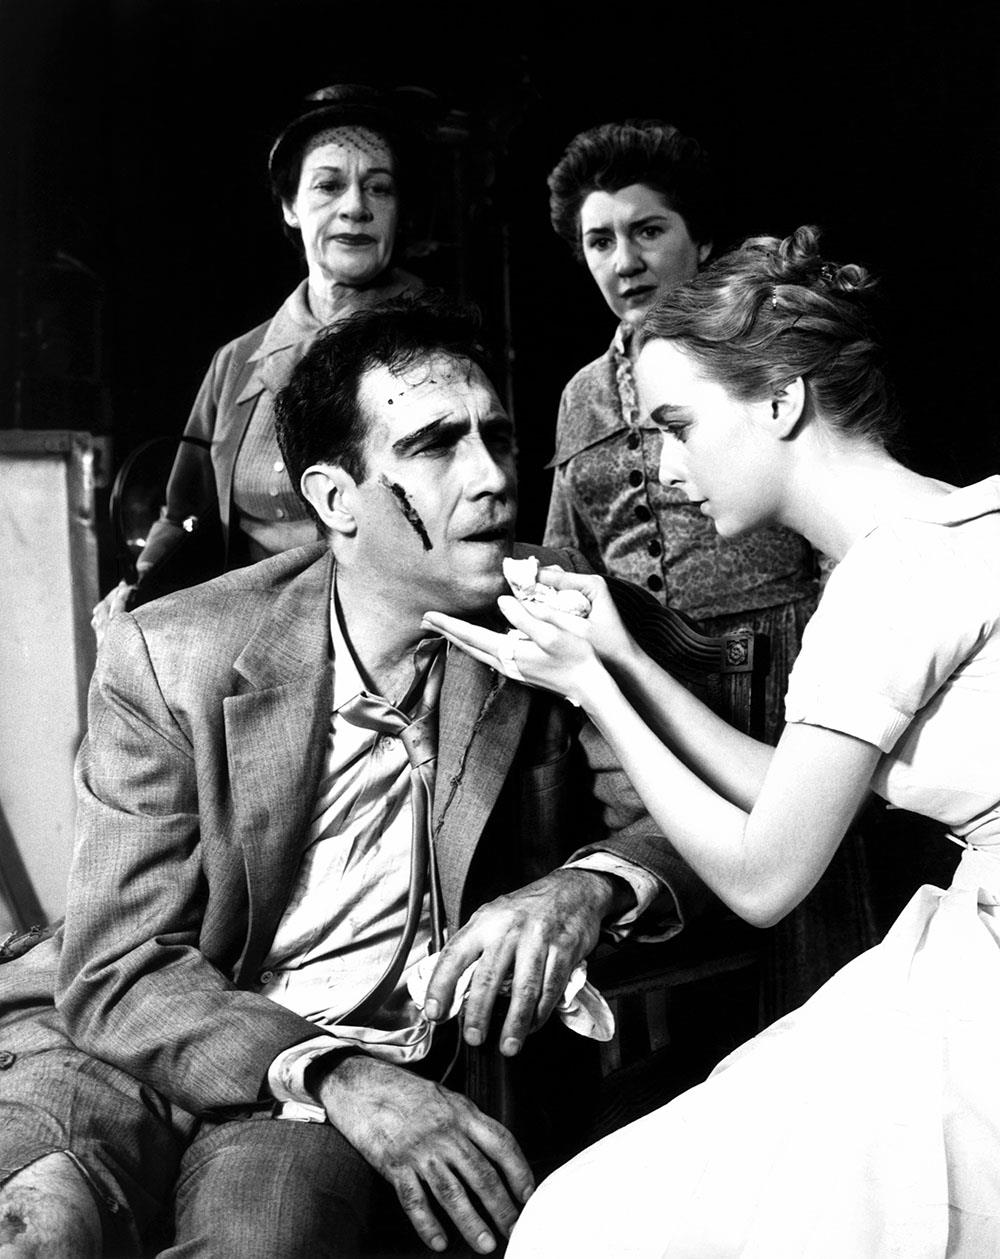 rochelle oliver, ‘who's afraid of virginia woolf?' star and admired acting teacher, dies at 86